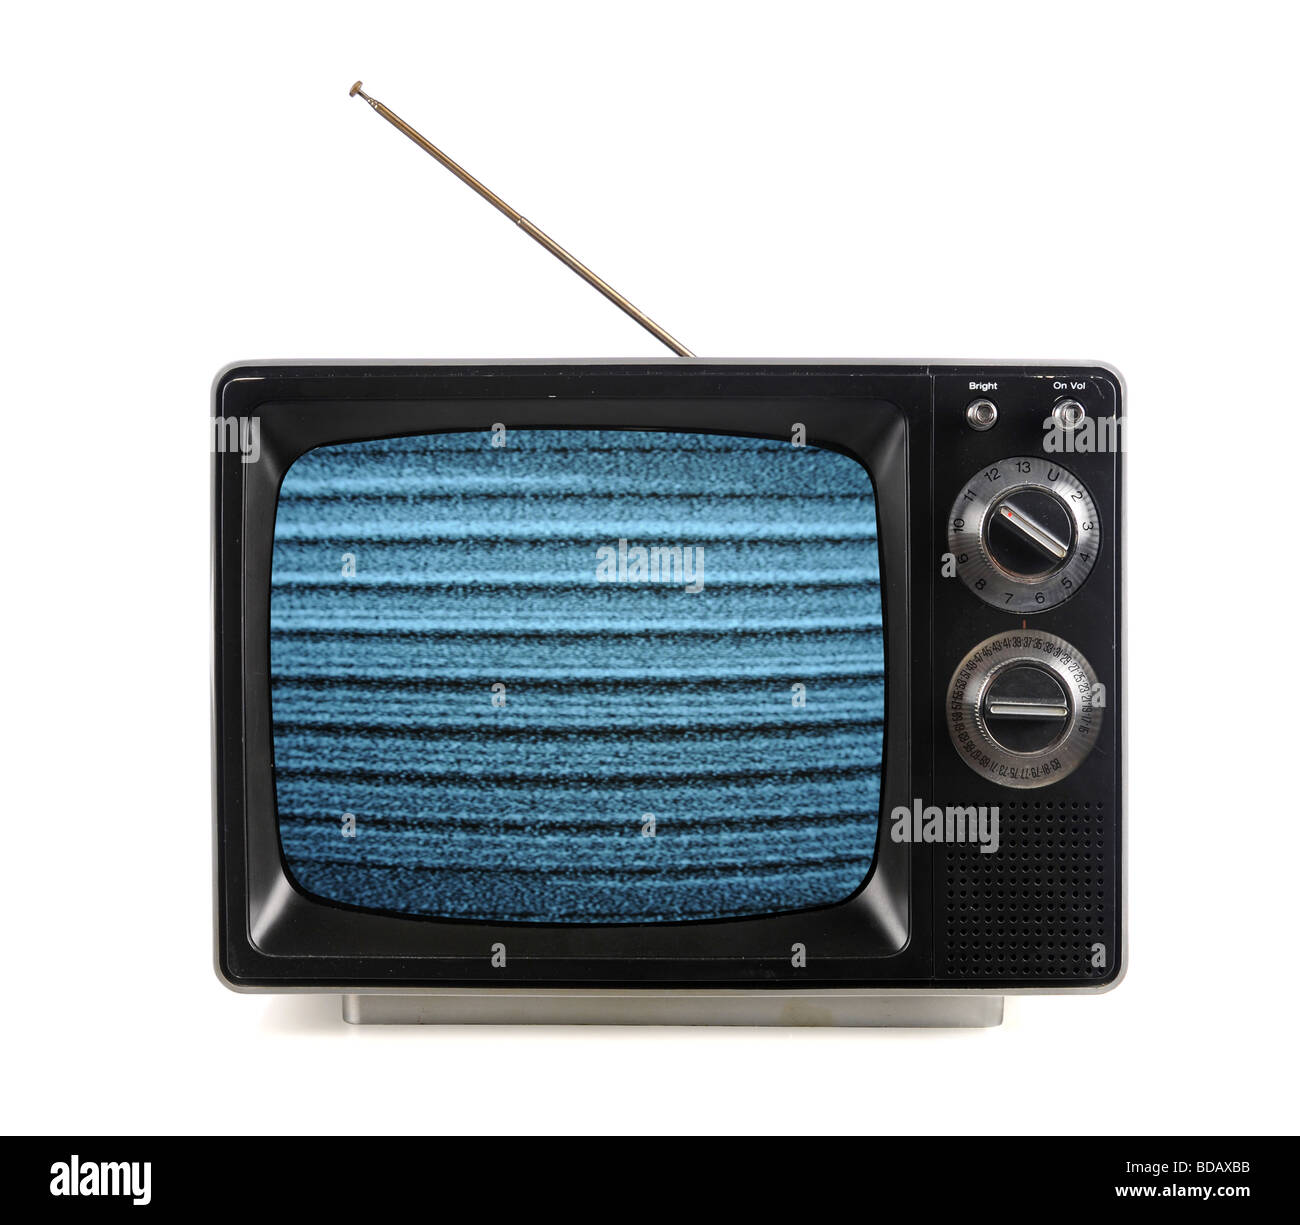 Vintage television with snow bands and patterns isolate over white Stock Photo